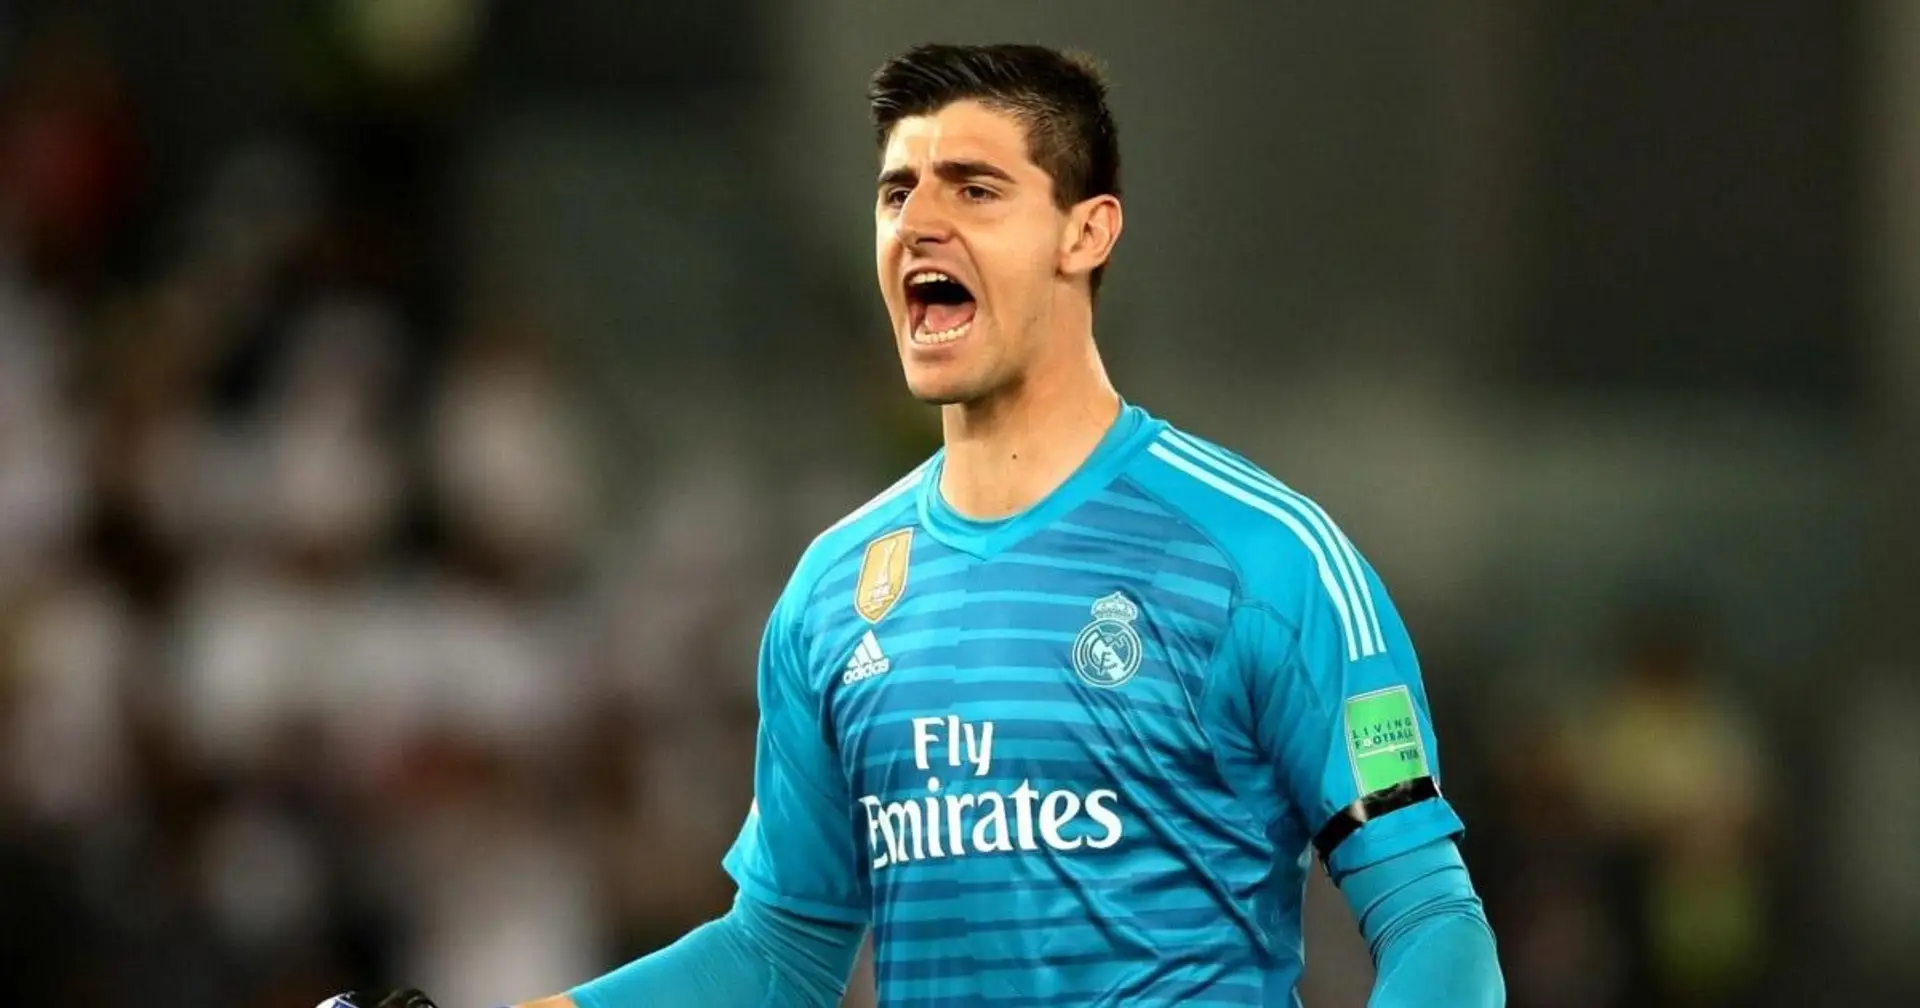 Belgium boss: 'Courtois is in the best moment of his career'